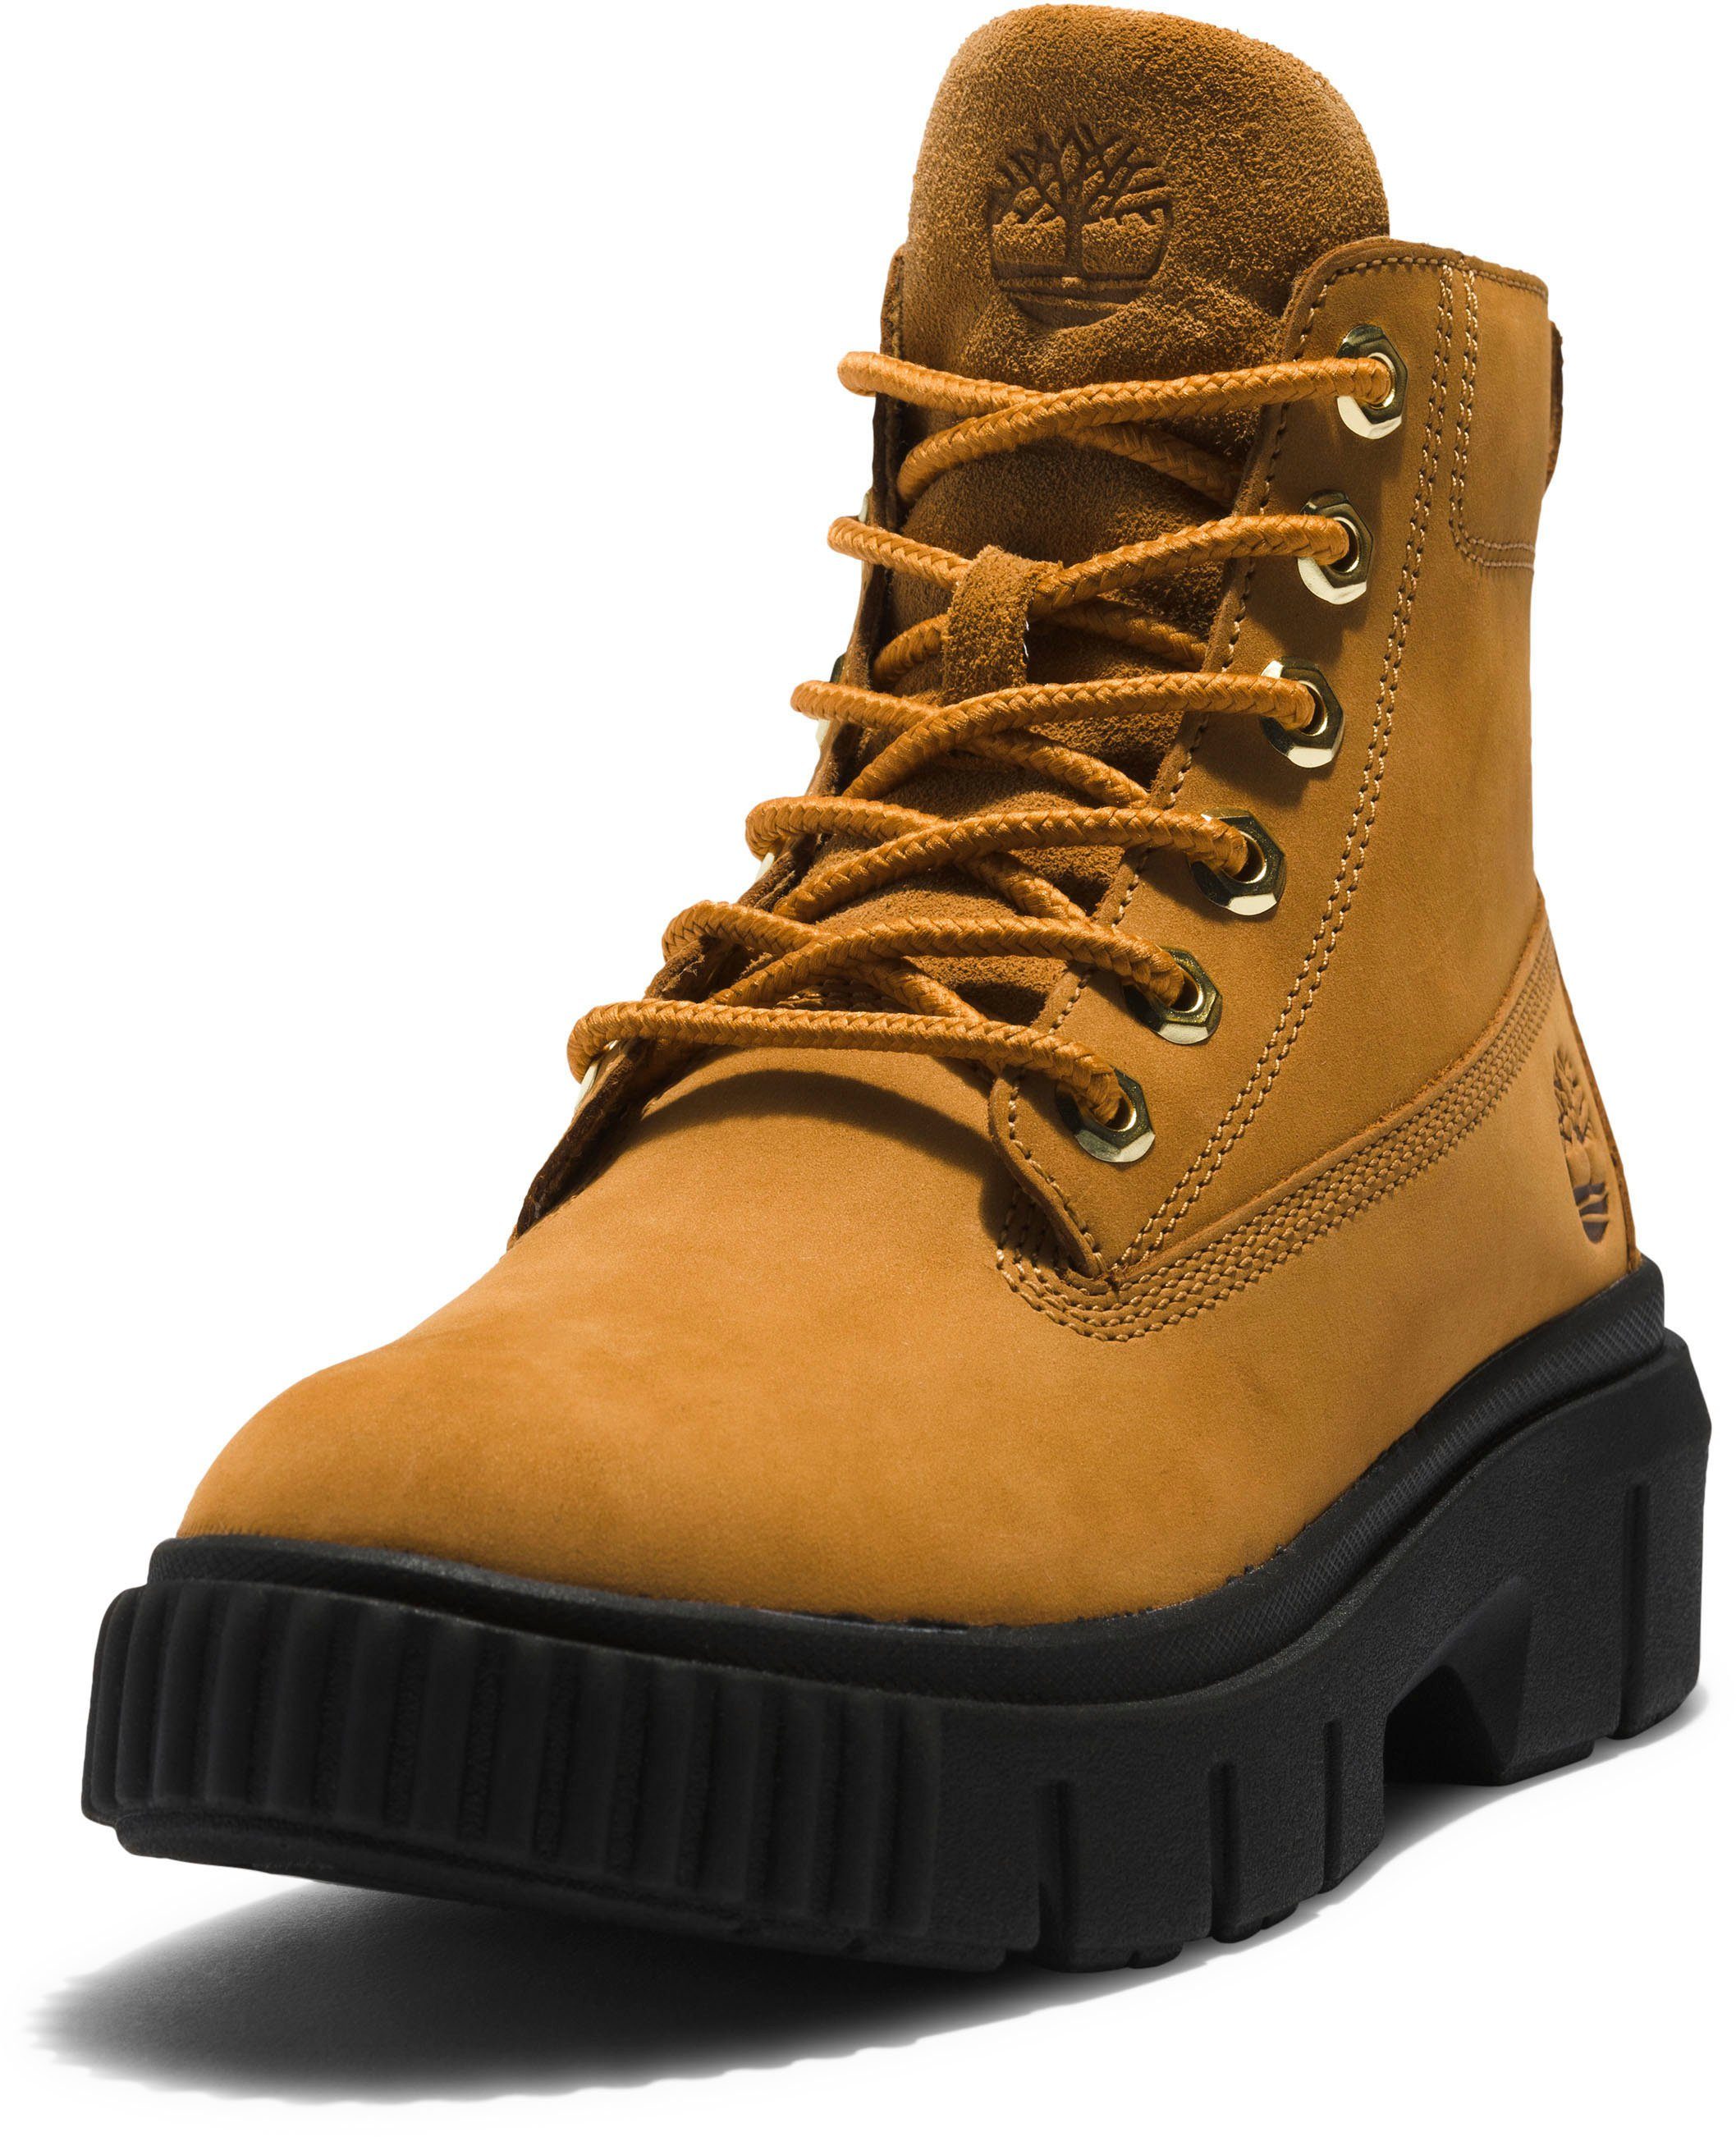 Timberland Greyfield Leather Schnürboots Boot wheat